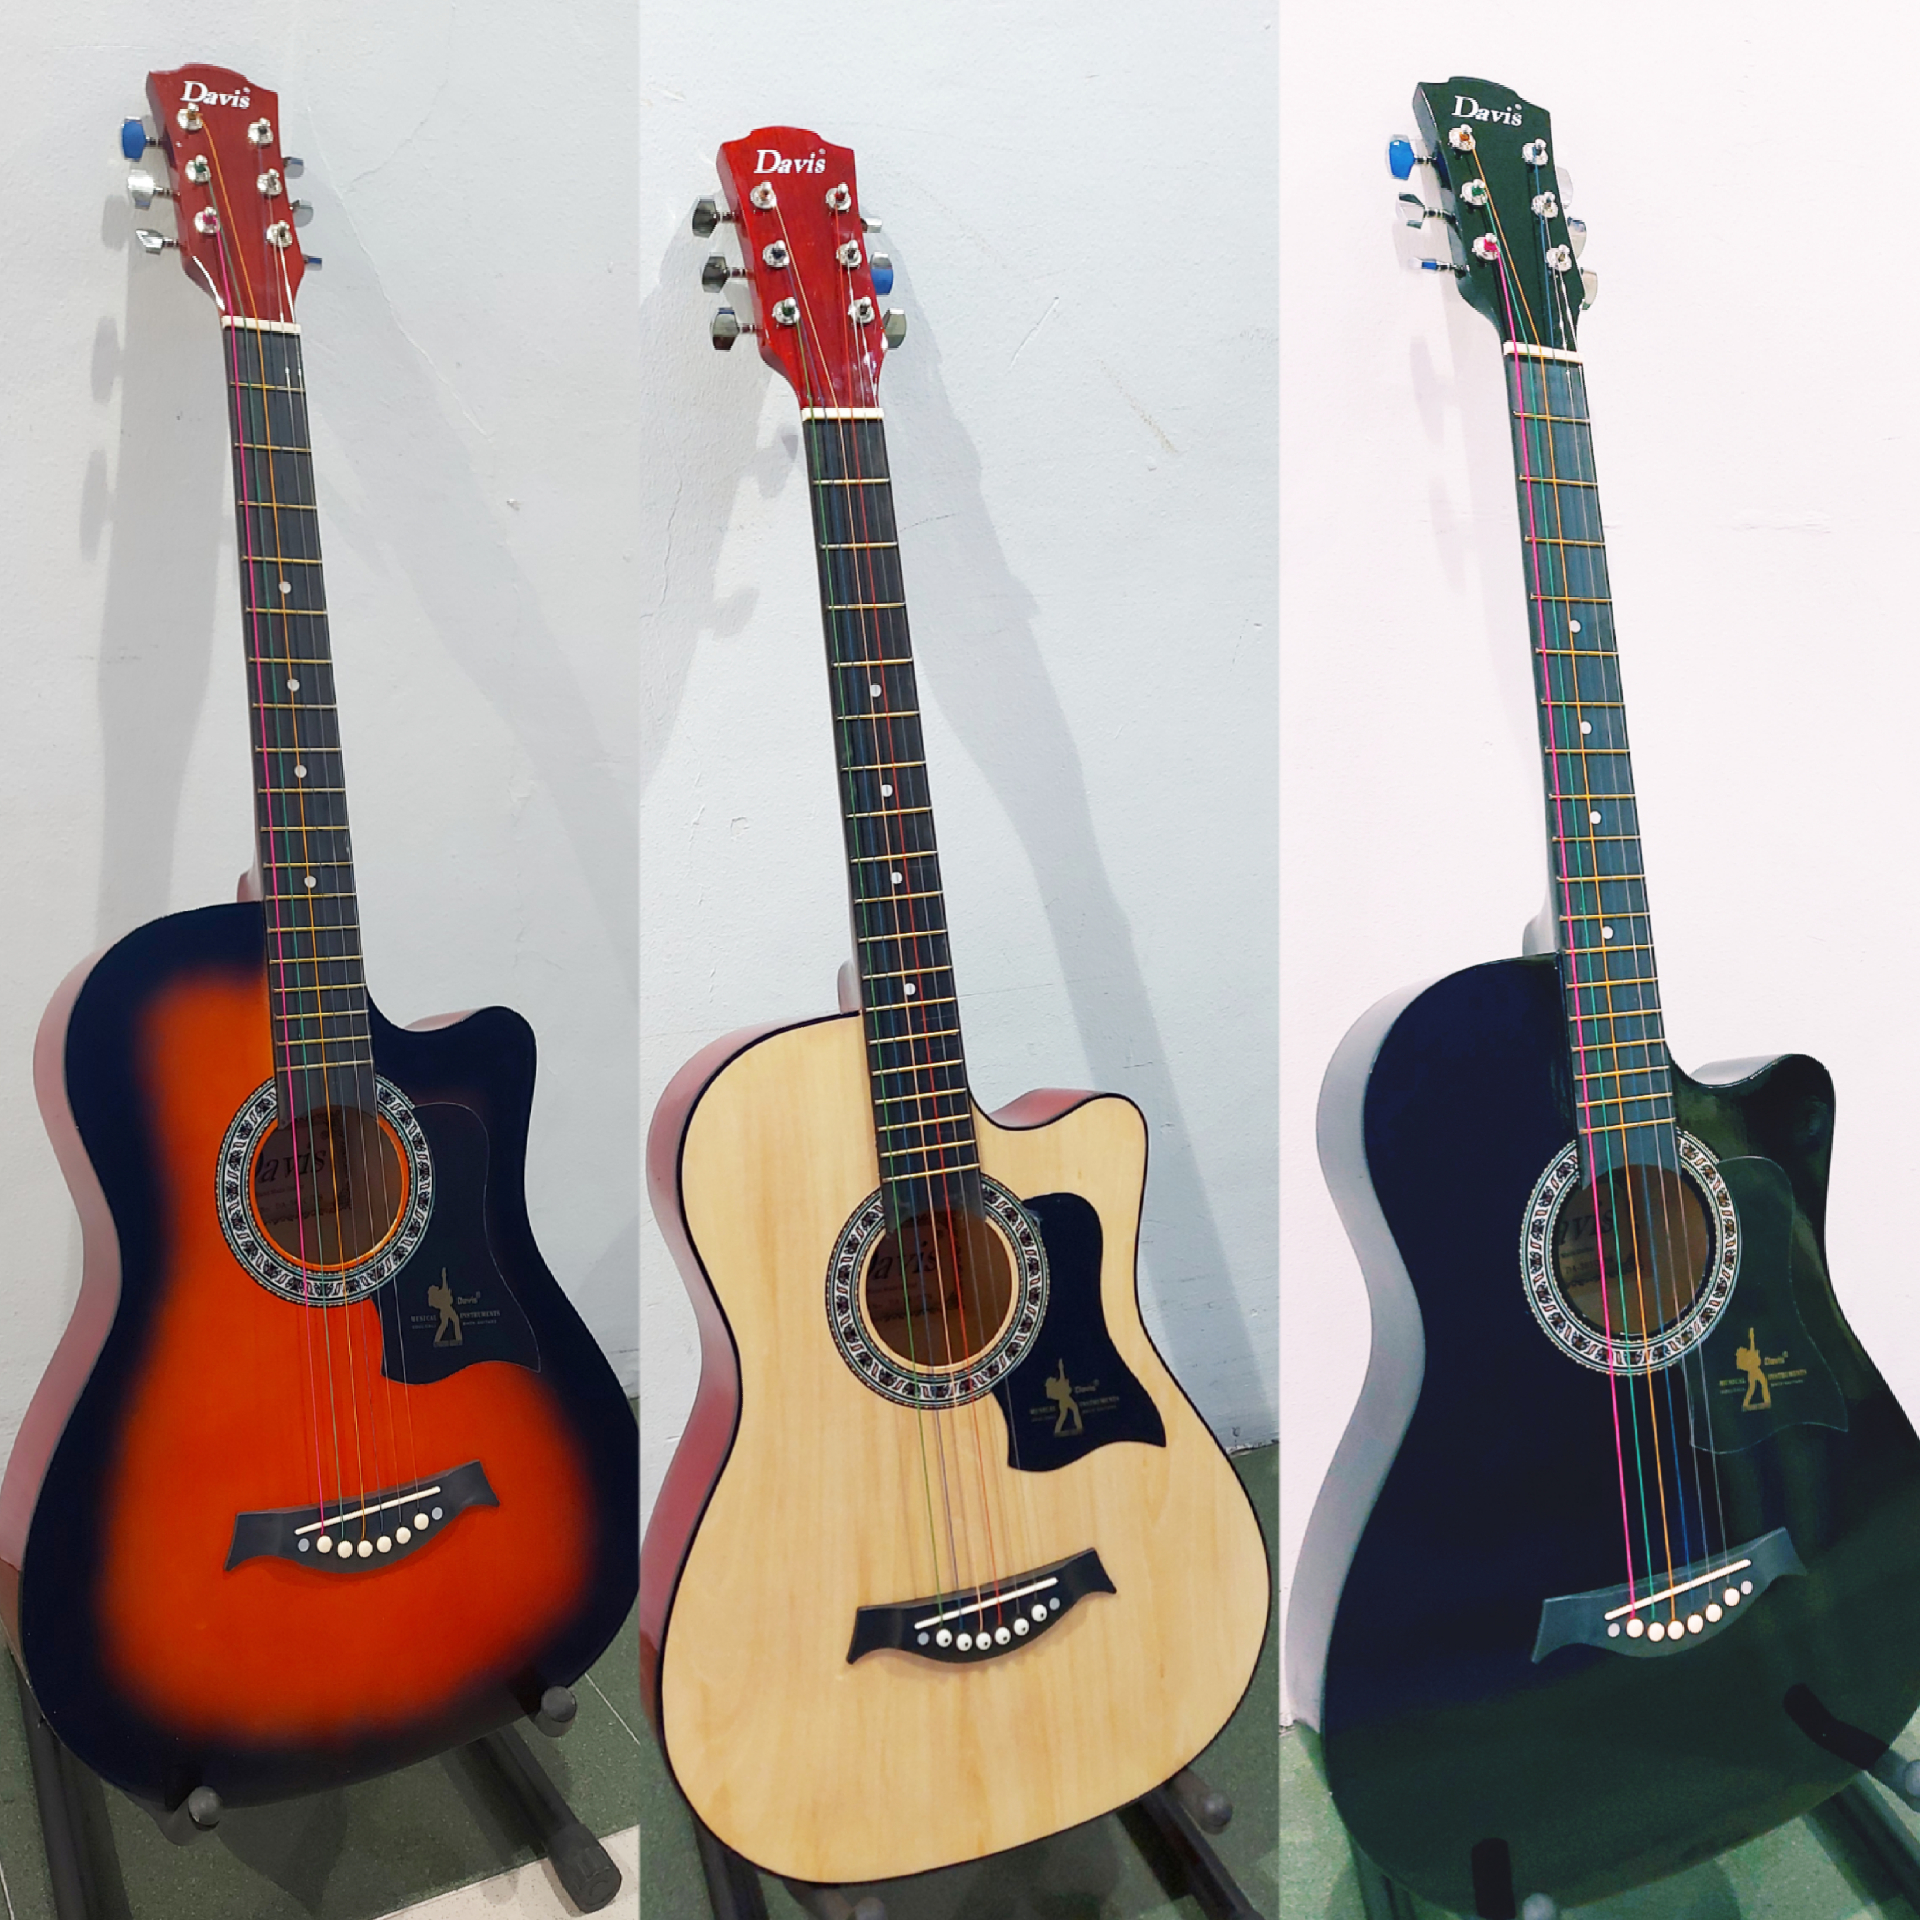 Davis Junior Acoustic Guitar with Freebies and Colorful Strings